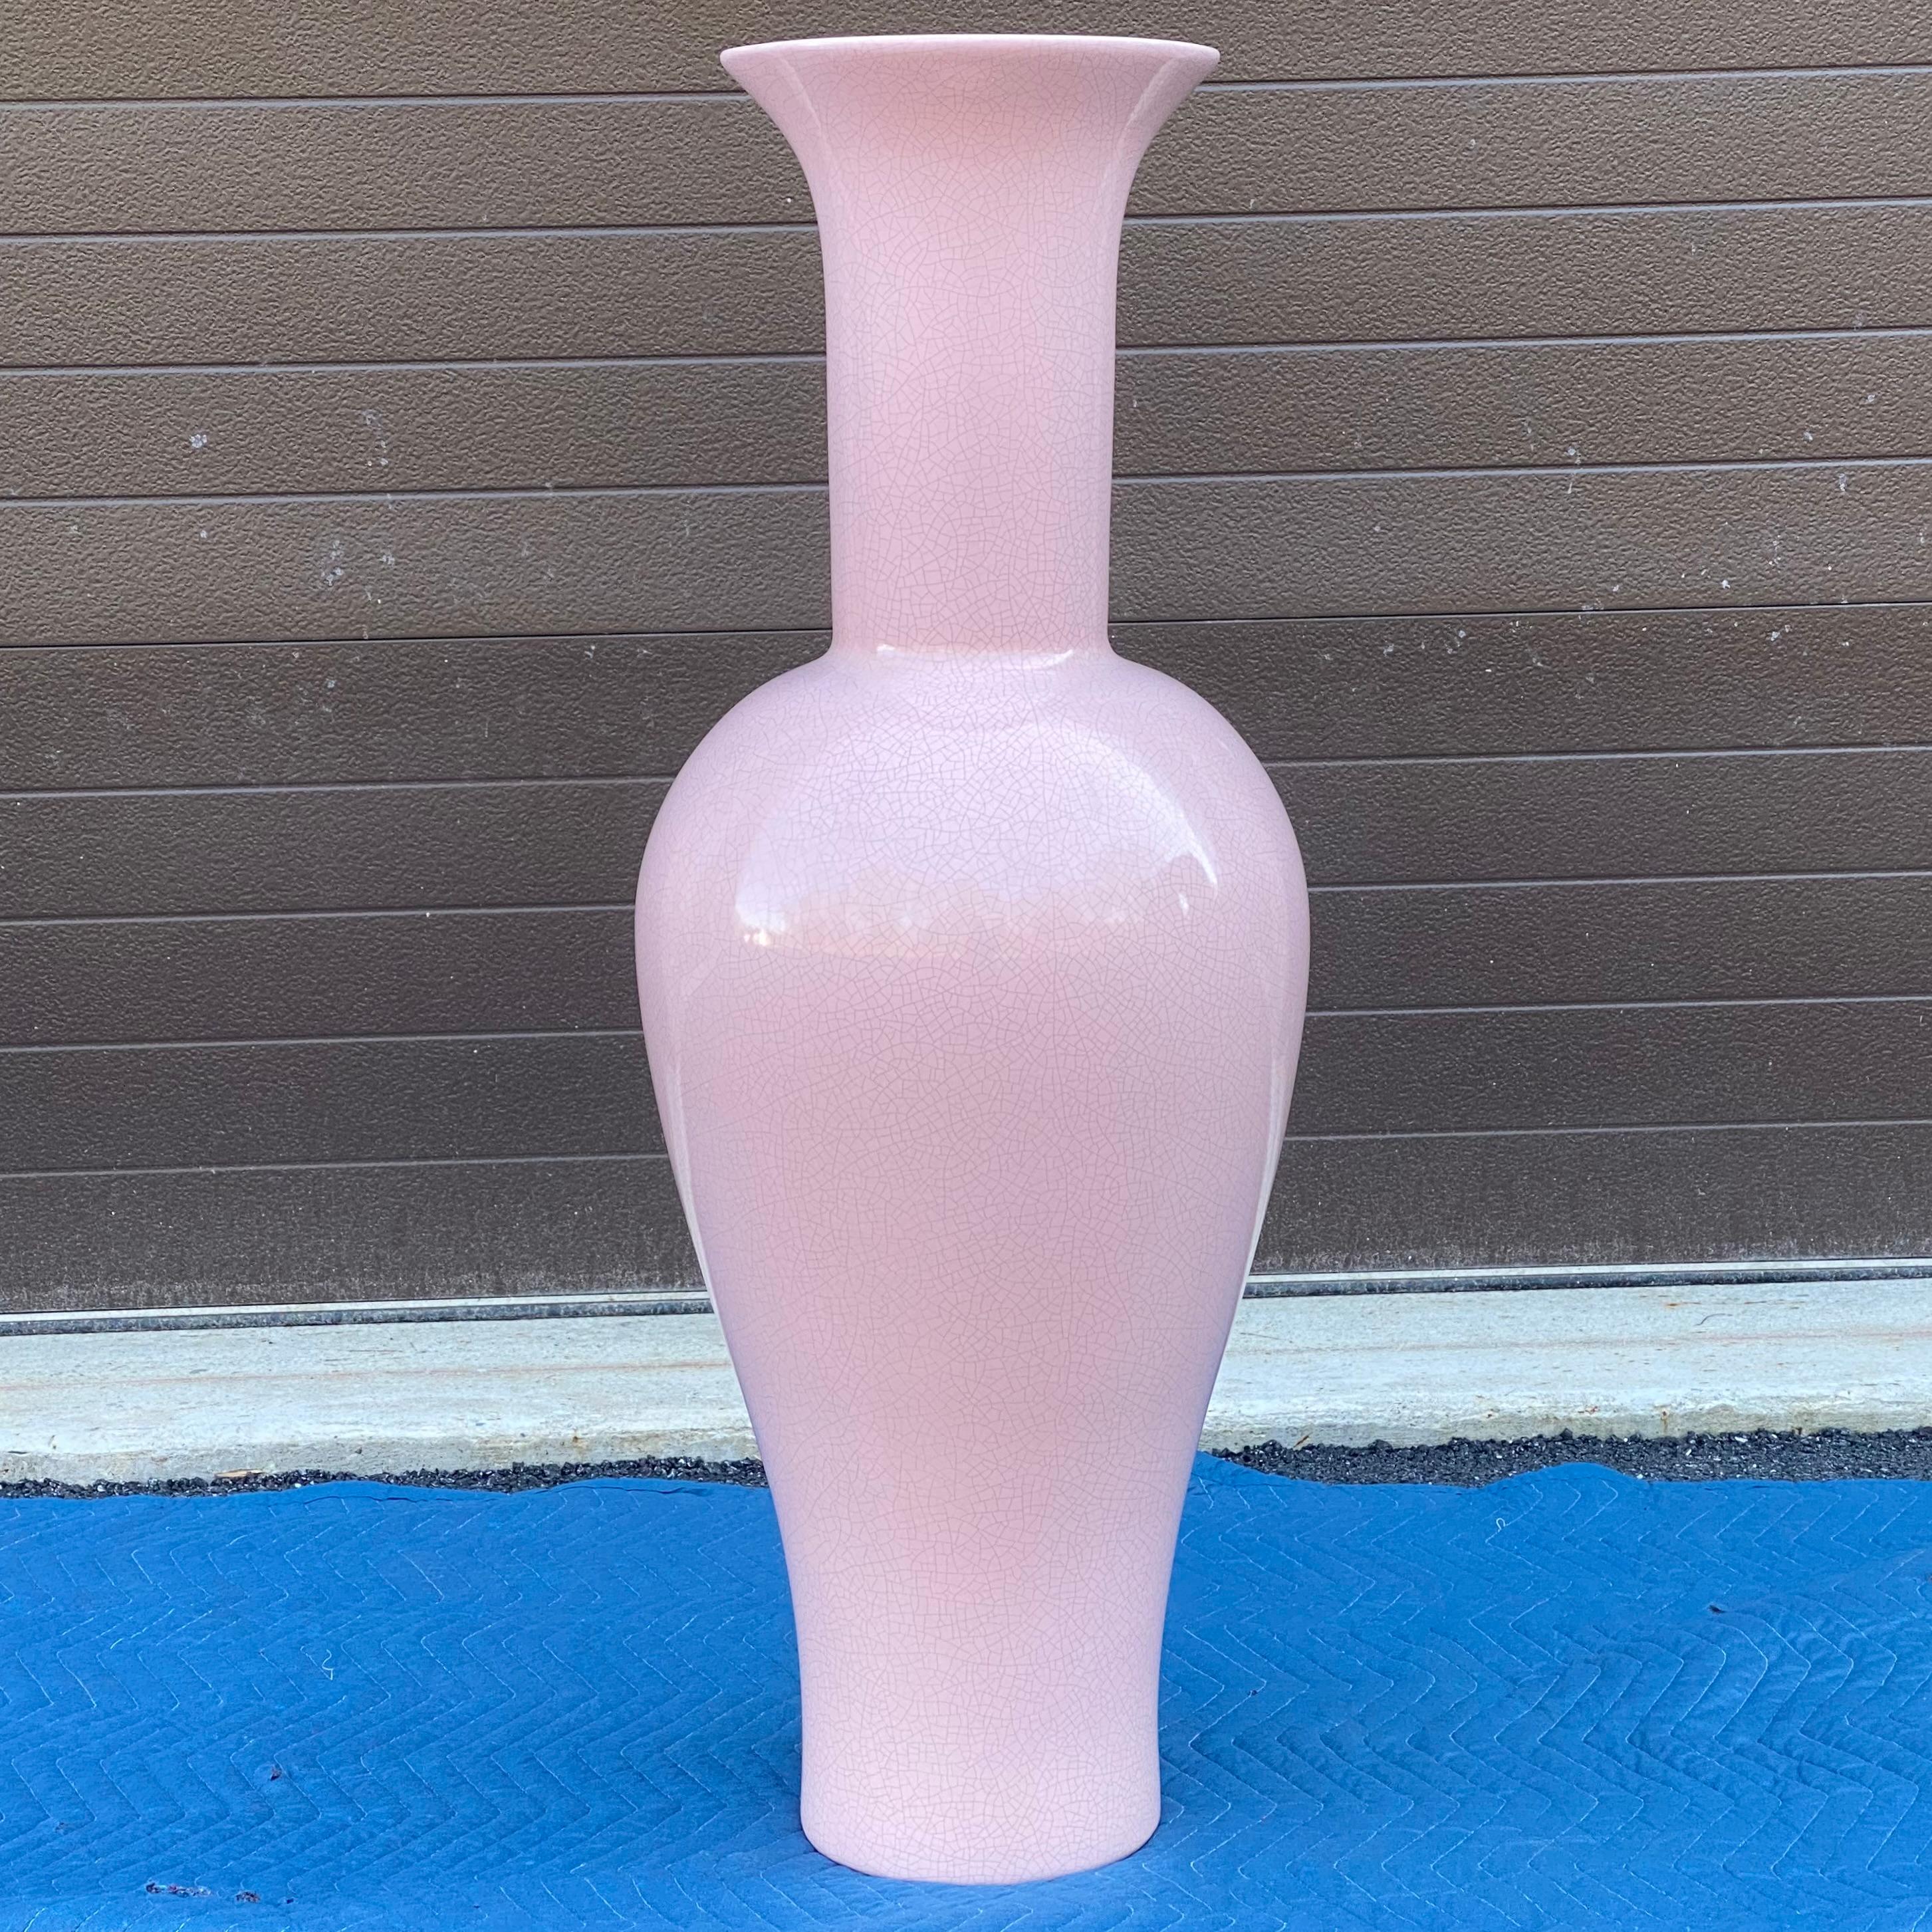 A fantastic artisan made huge ceramic vase fired in a pink crackle glaze finish by the California pottery company Jaru.